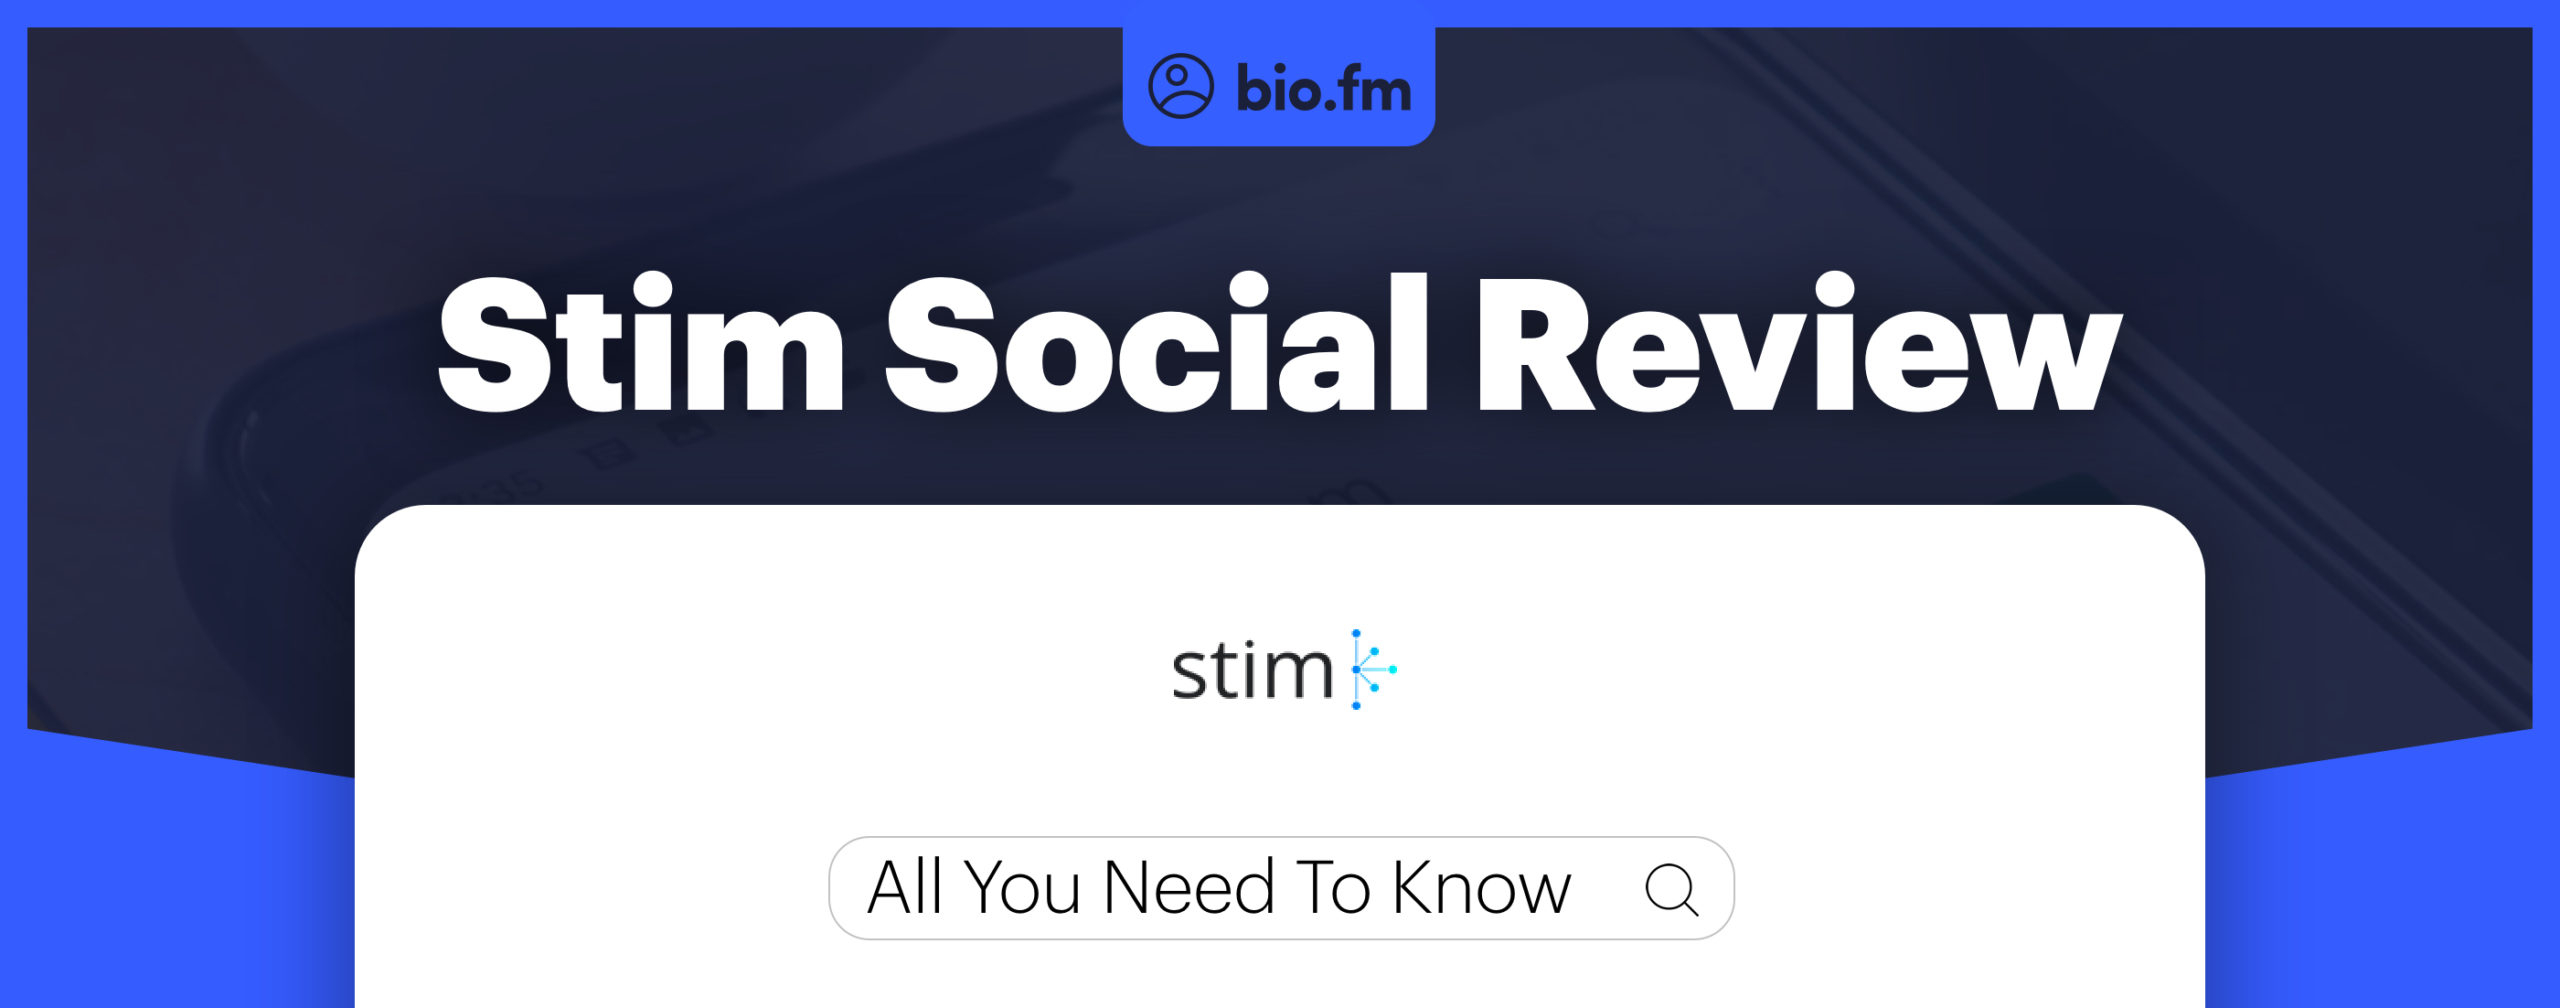 stim social review featured image